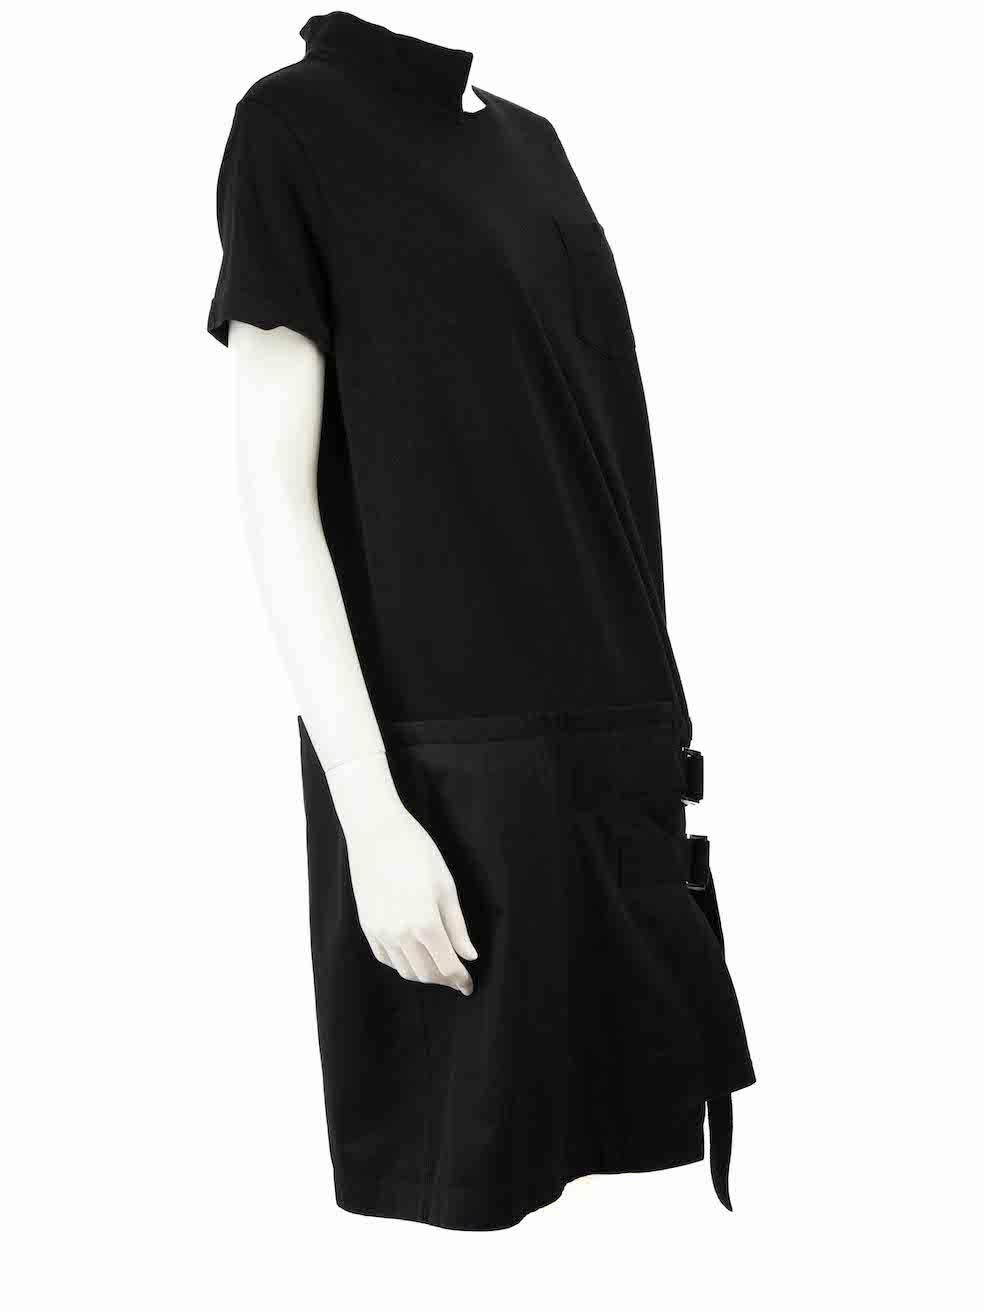 CONDITION is Very good. Hardly any visible wear to dress is evident on this used Sacai designer resale item.
 
 Details
 Black
 Cotton
 Dress
 Short sleeves
 Asymmetric round neck
 1x Pocket
 Skirt buckle detail
 
 
 Made in Japan
 
 Composition
